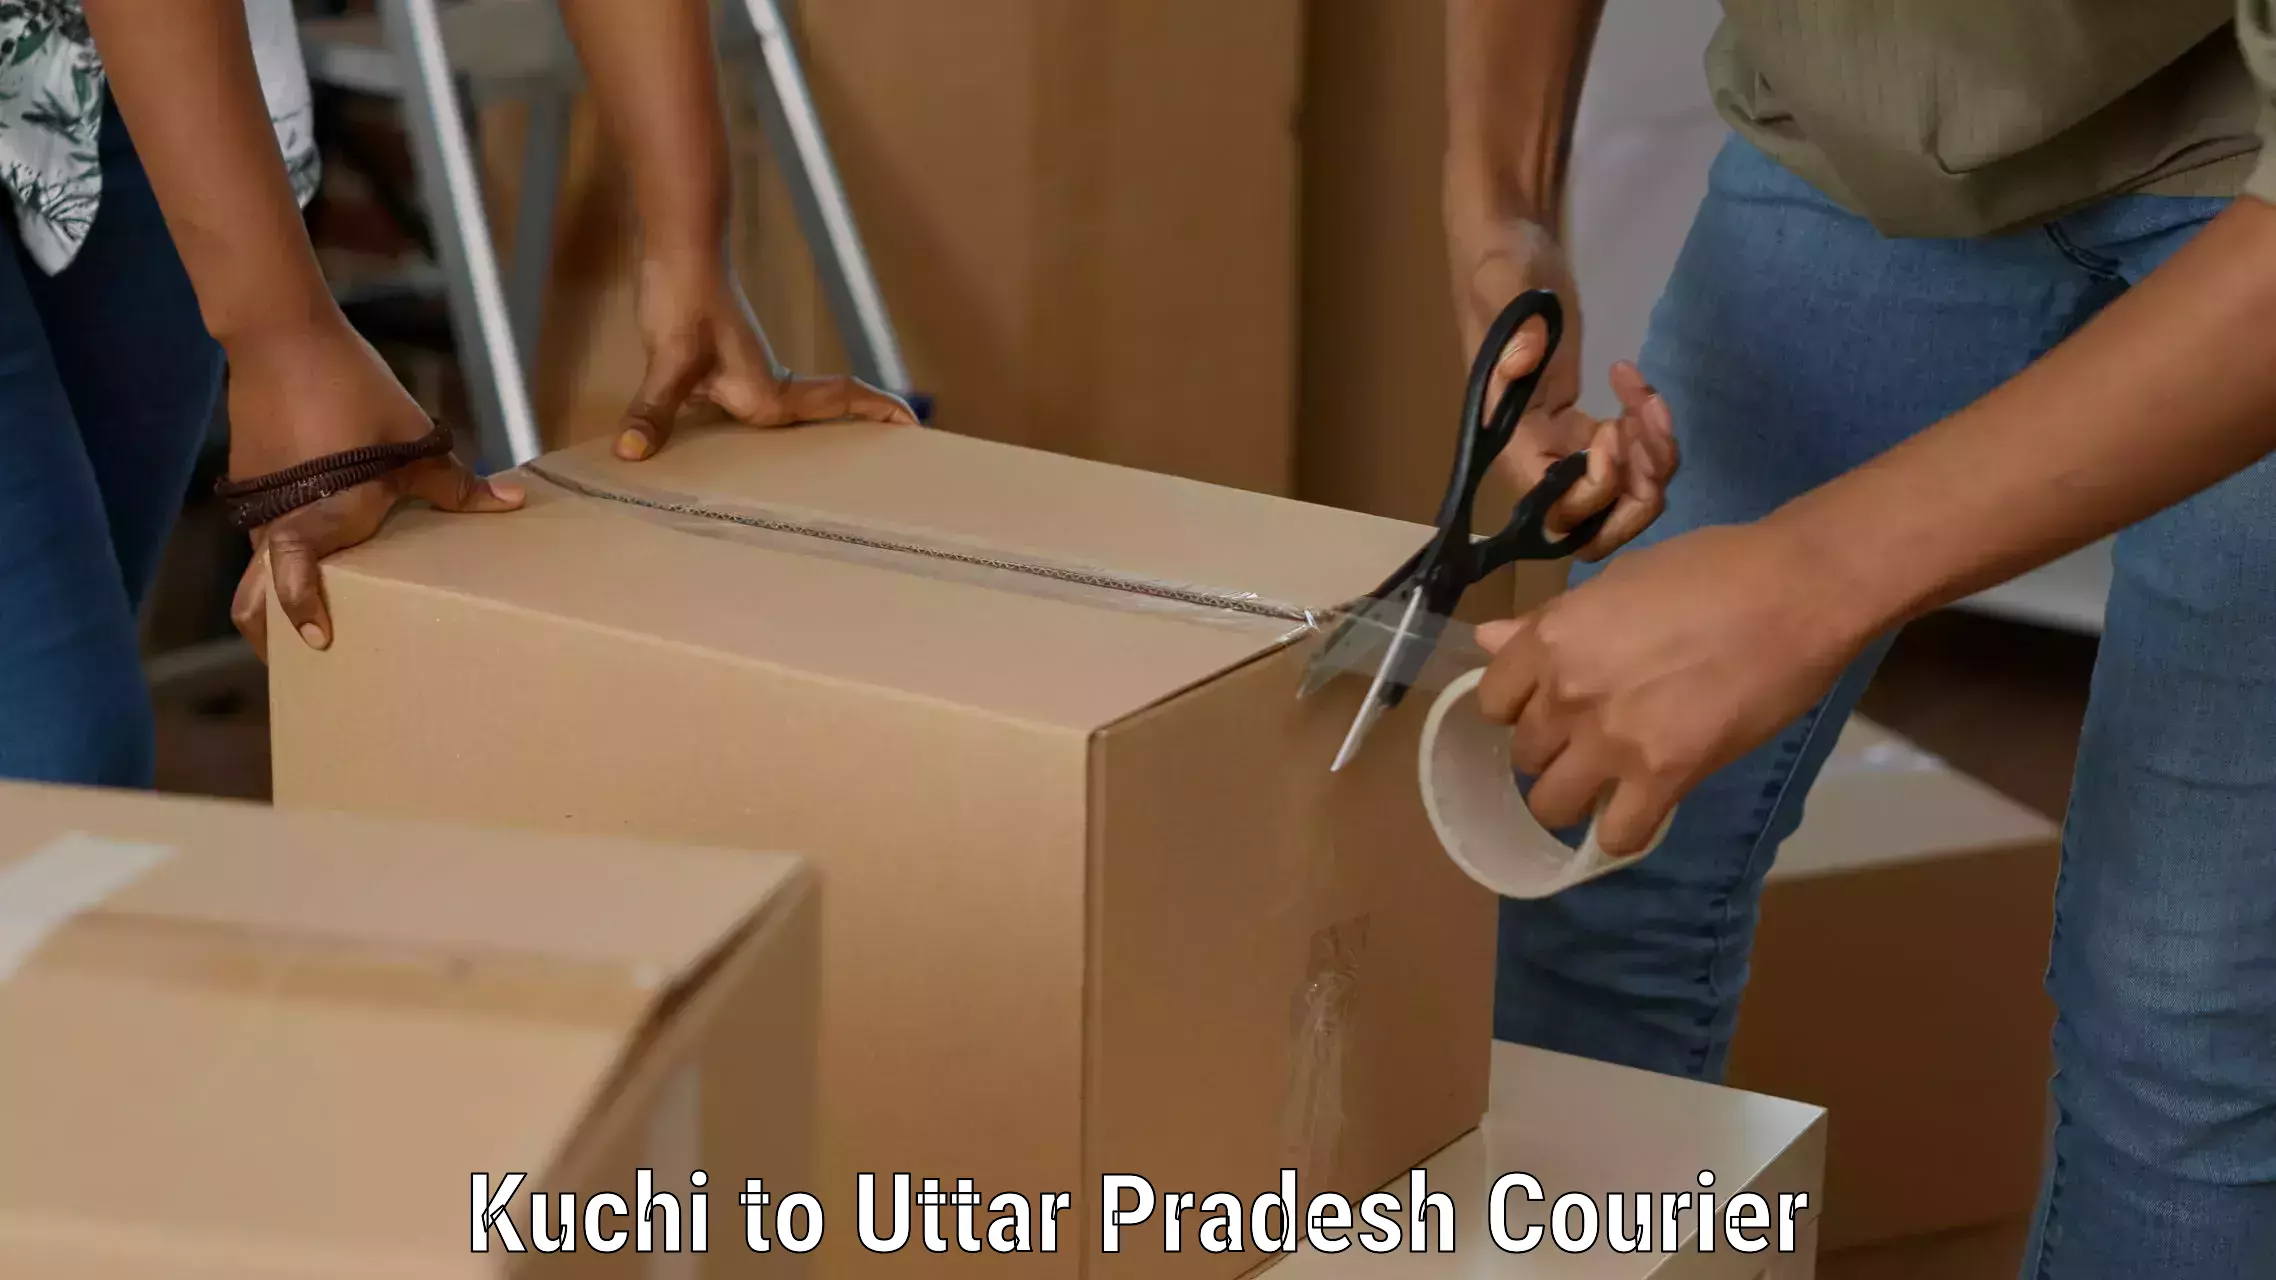 Residential courier service Kuchi to Basti